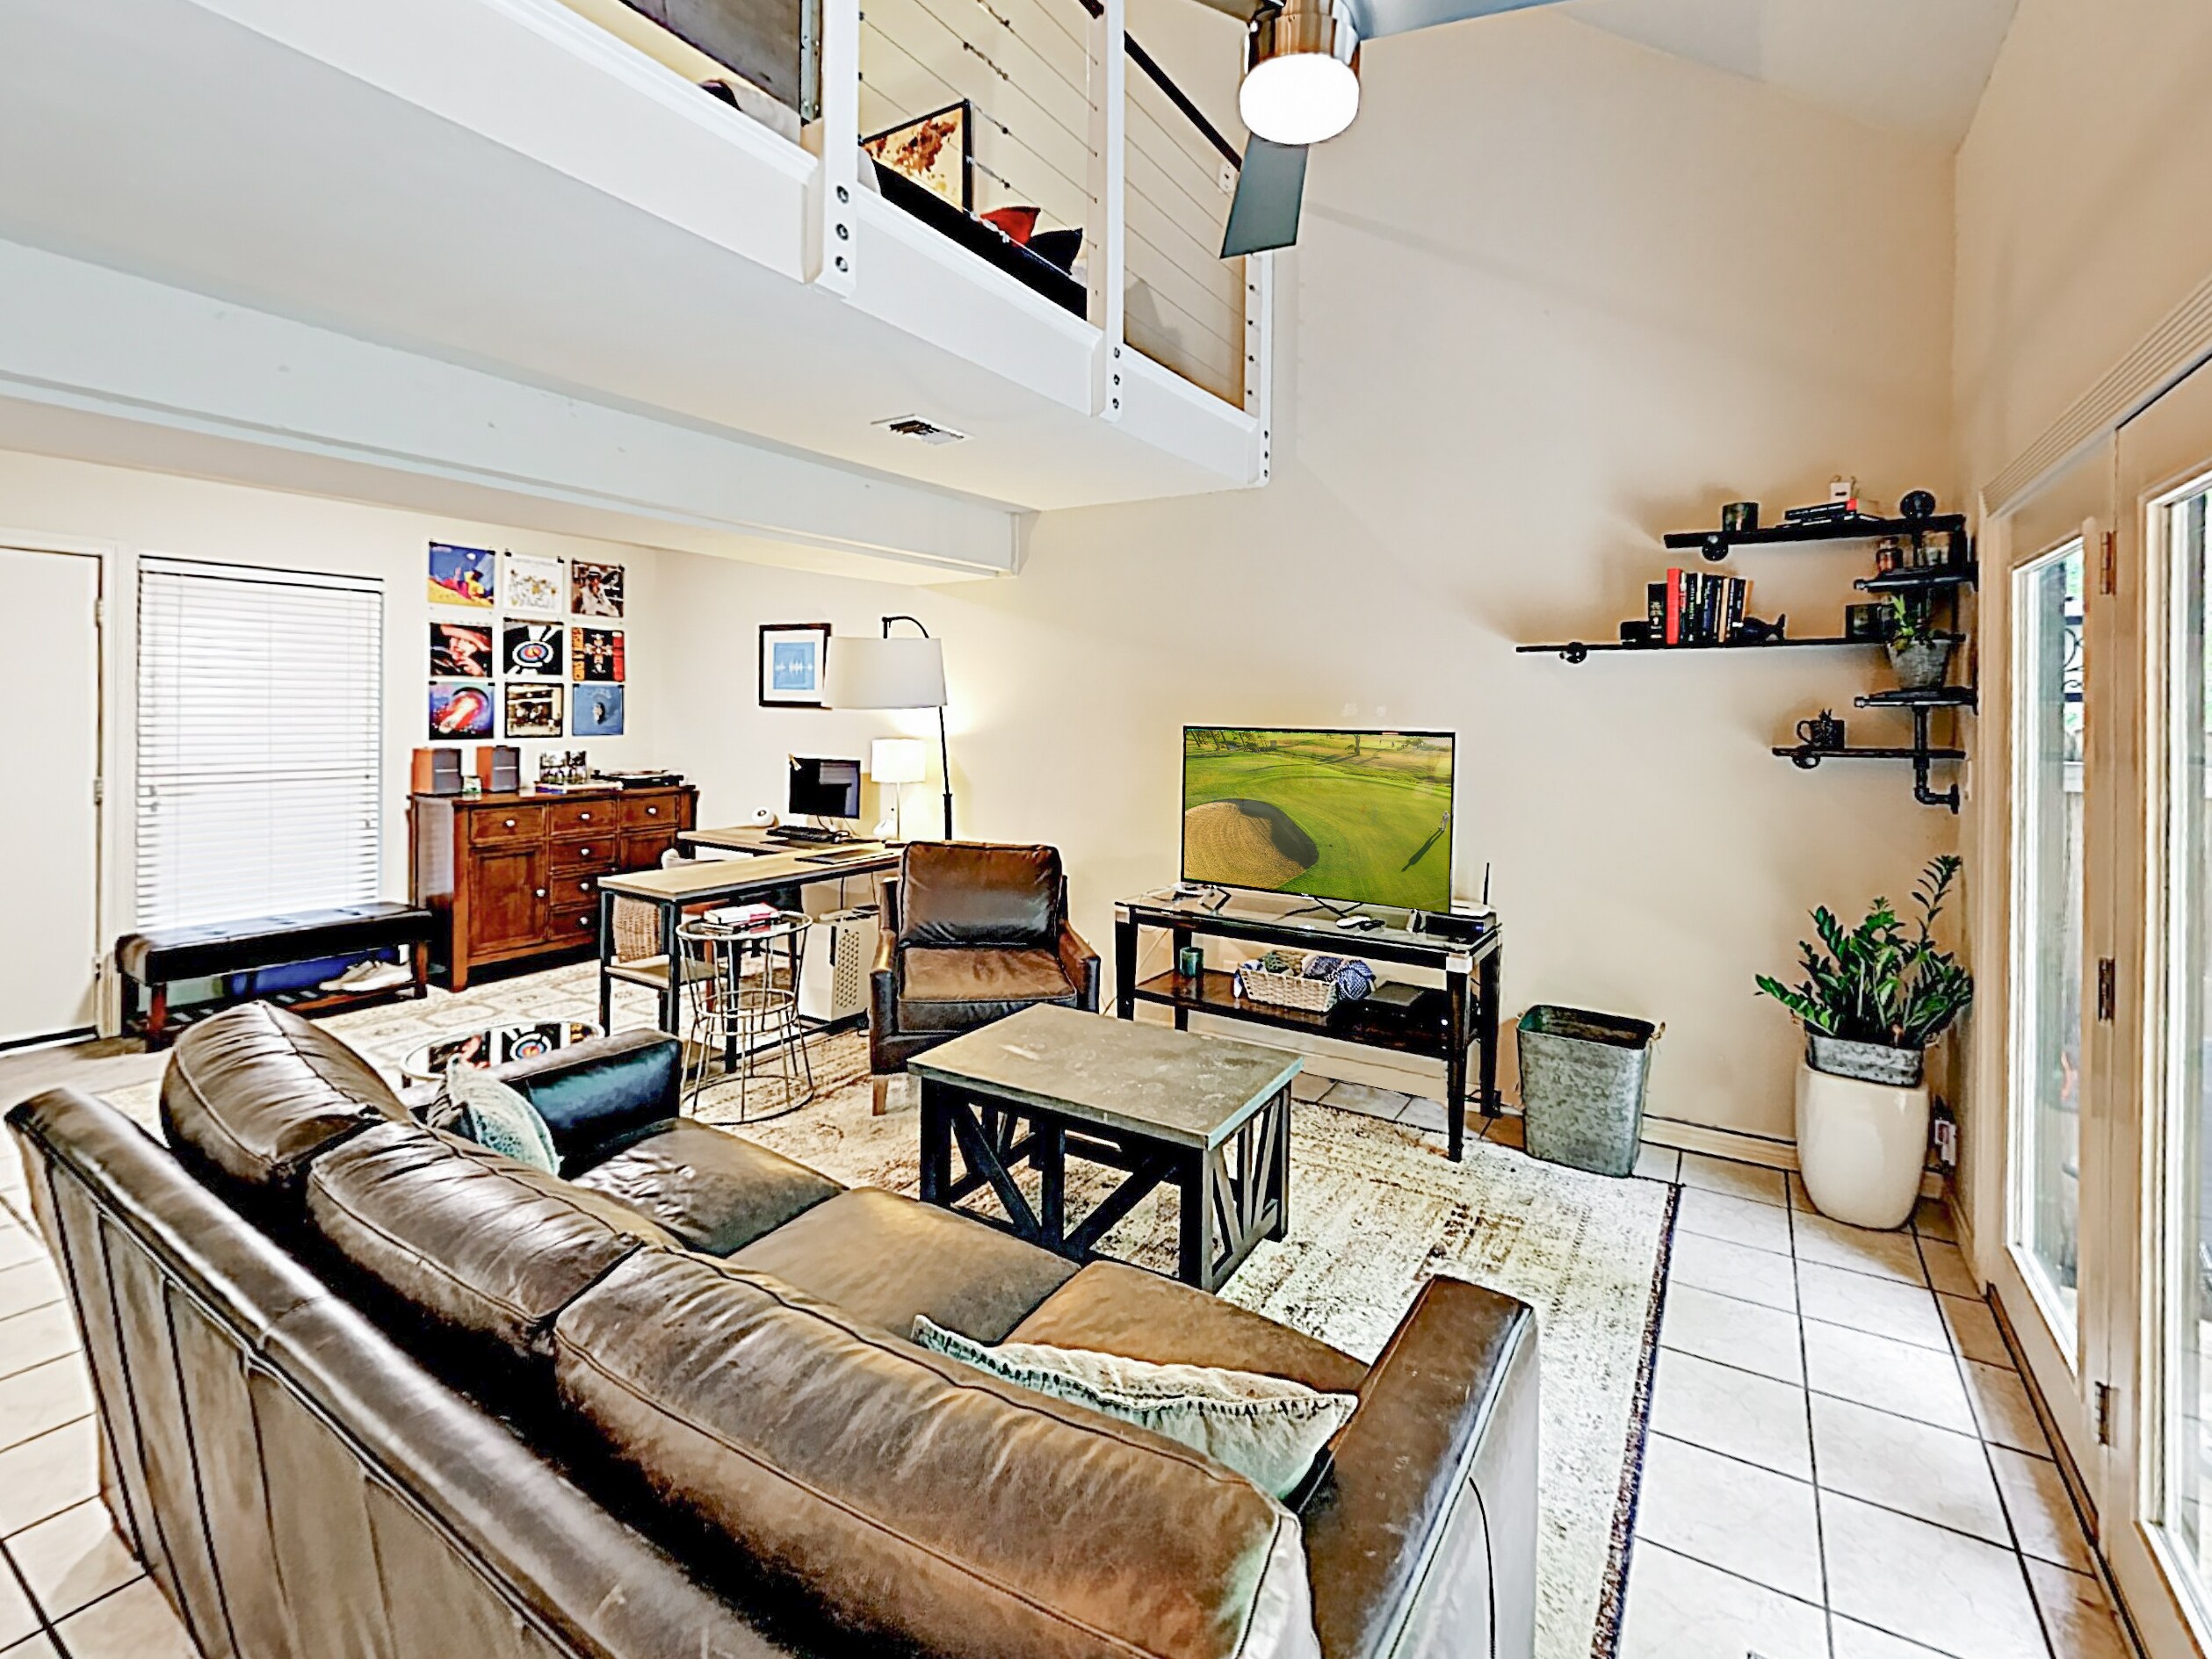 Welcome to Austin! This duplex is professionally managed by TurnKey Vacation Rentals.